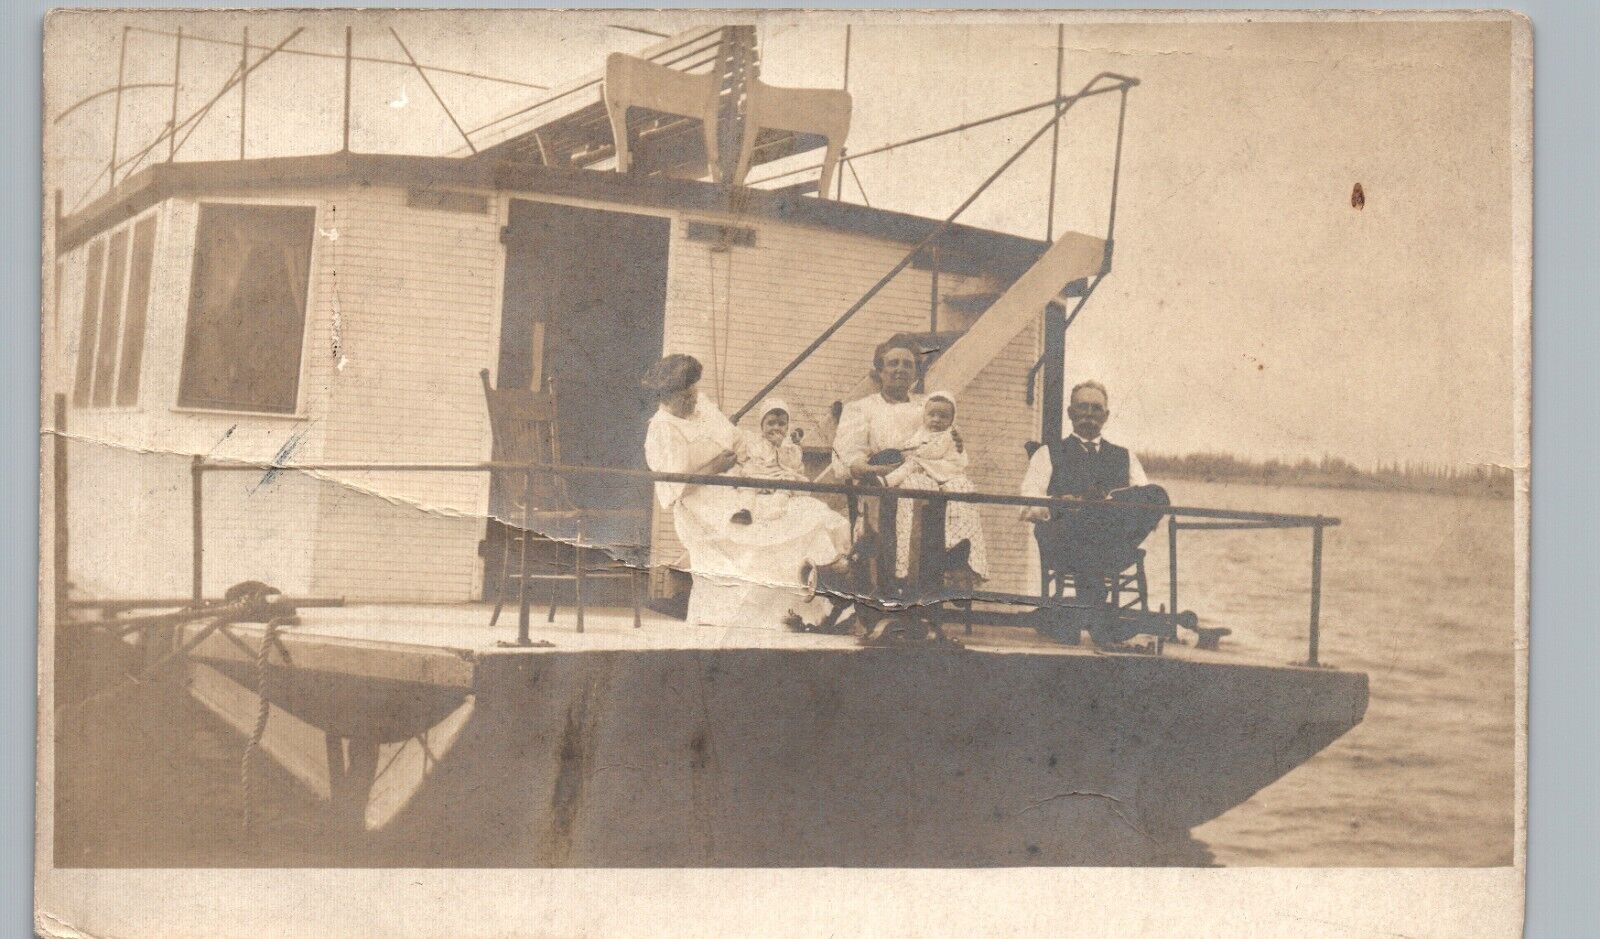 FERRY BOAT STERN PARTY c1910 sheboygan wi real photo postcard rppc ~CREASE